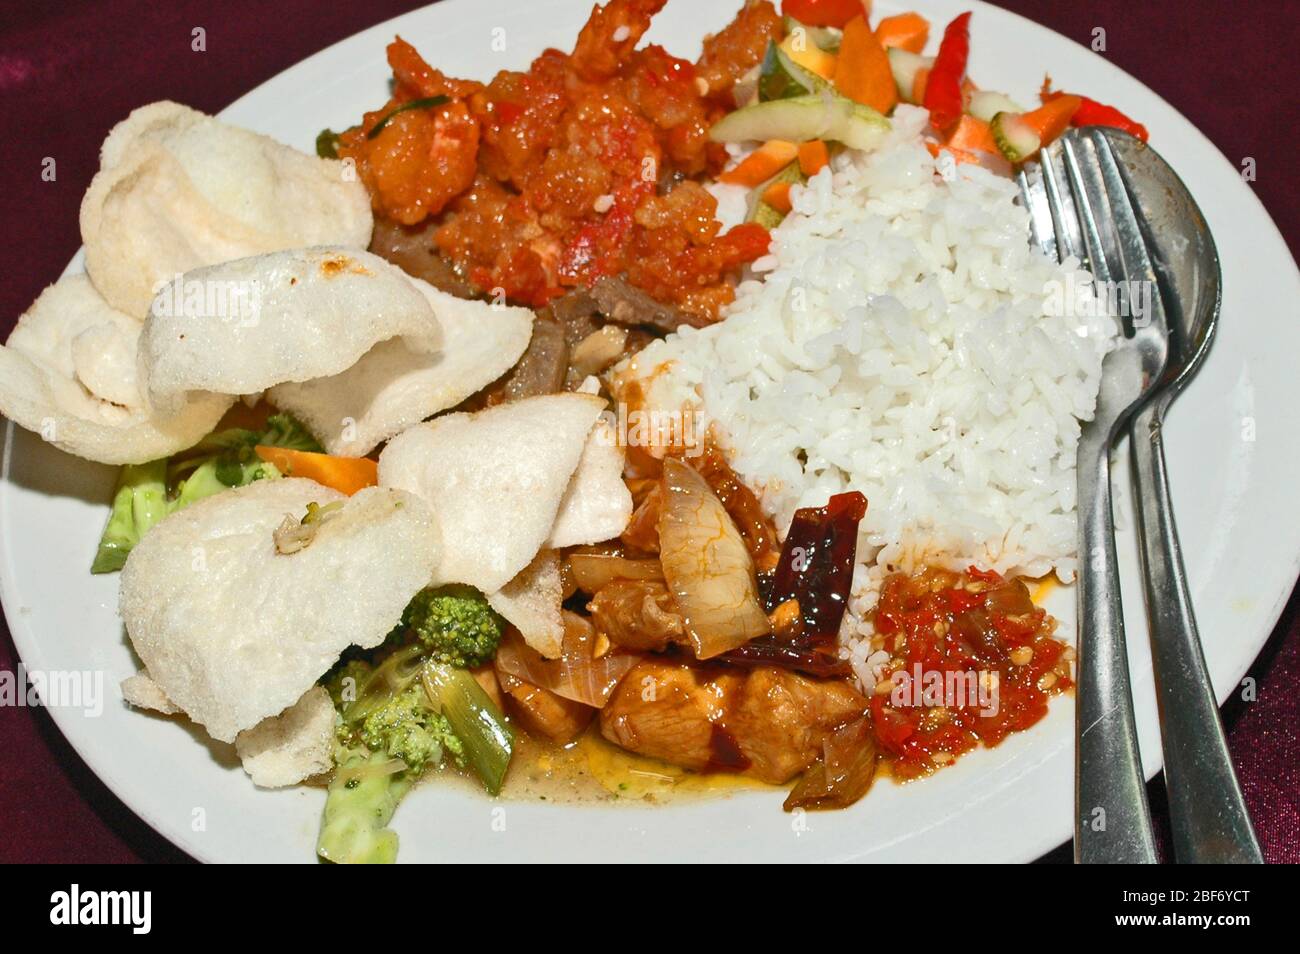 Authentic Indonesian rice meal, Nasi rames Stock Photo - Alamy